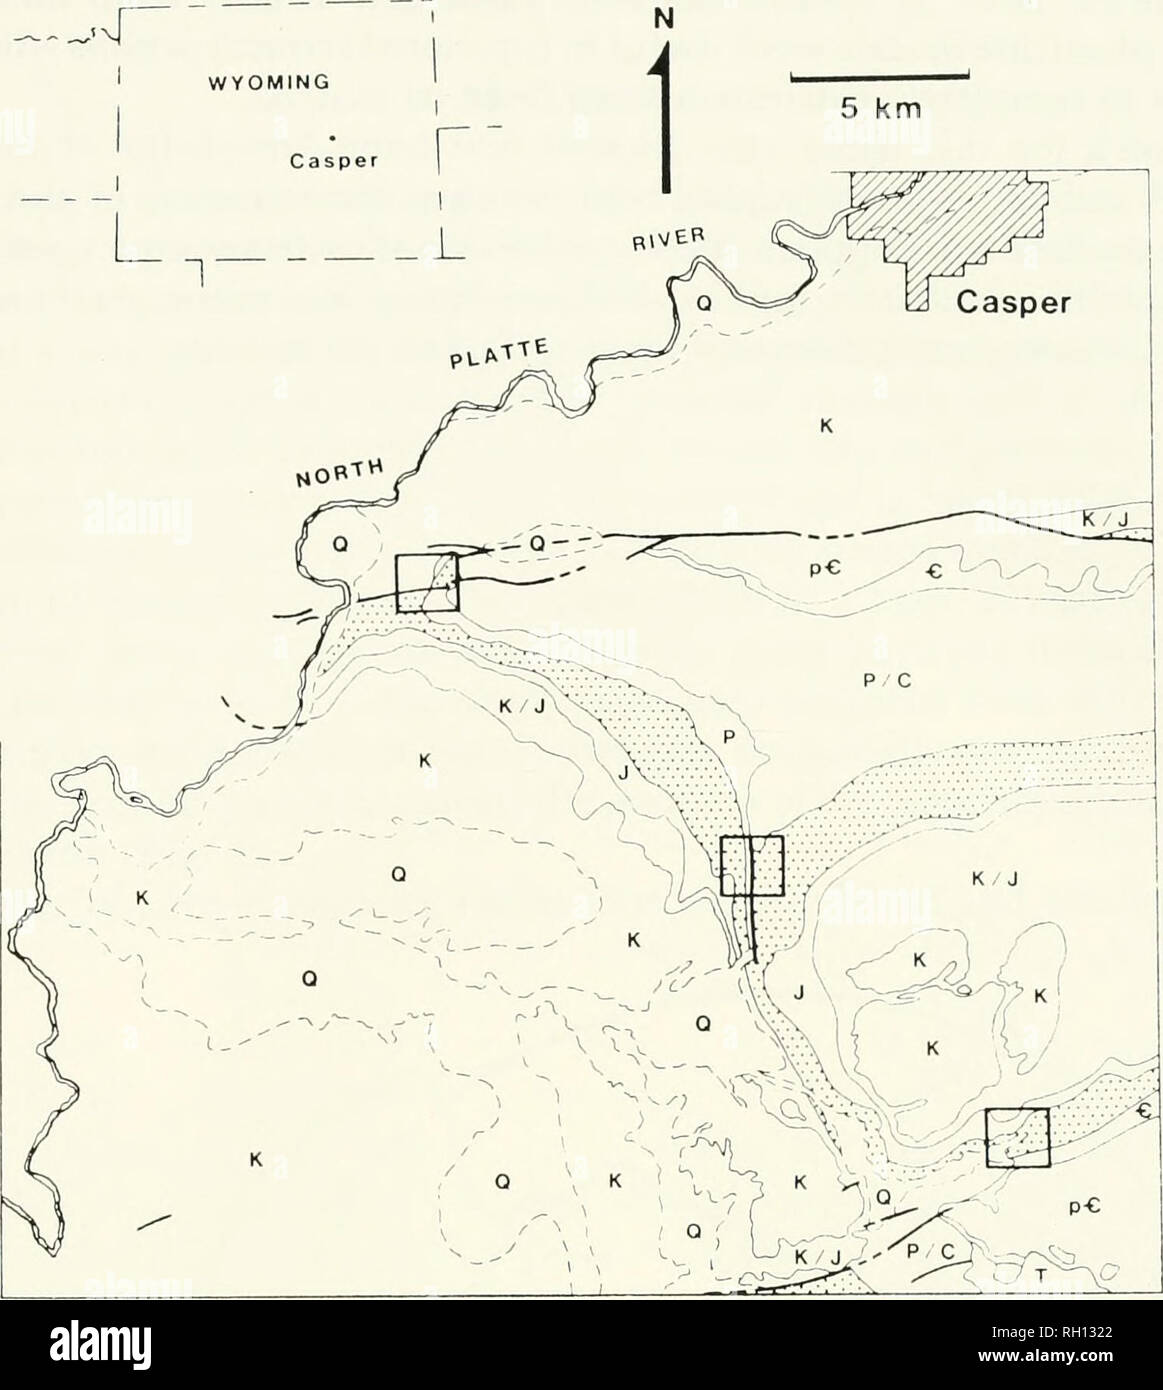 . Bulletin. Natural history; Natuurlijke historie. COROSAURUS ALCOVENSIS. Fig. 2. Simplified geologic map of Casper-Goose Egg-Freeland Junction area, Natrona County, Wyoming, after Fig. 1. Triassic and undiflTerentiated Permo-Triassic sediments stippled. Areas of Quaternary surficial deposits marked by dashed outlines. Faults indicated by heavy lines. G= Cam- brian; J = Jurassic; K = Cretaceous; K/J = undiflTerentiated Cretaceous and Jurassic; P = Permian; pG = Precambrian; P/C = undiflTerentiated Permo-Carboniferous; Q = Quaternary; T = Tertiary. land Junction, Sec 2, T31N, R80W. Most of the  Stock Photo